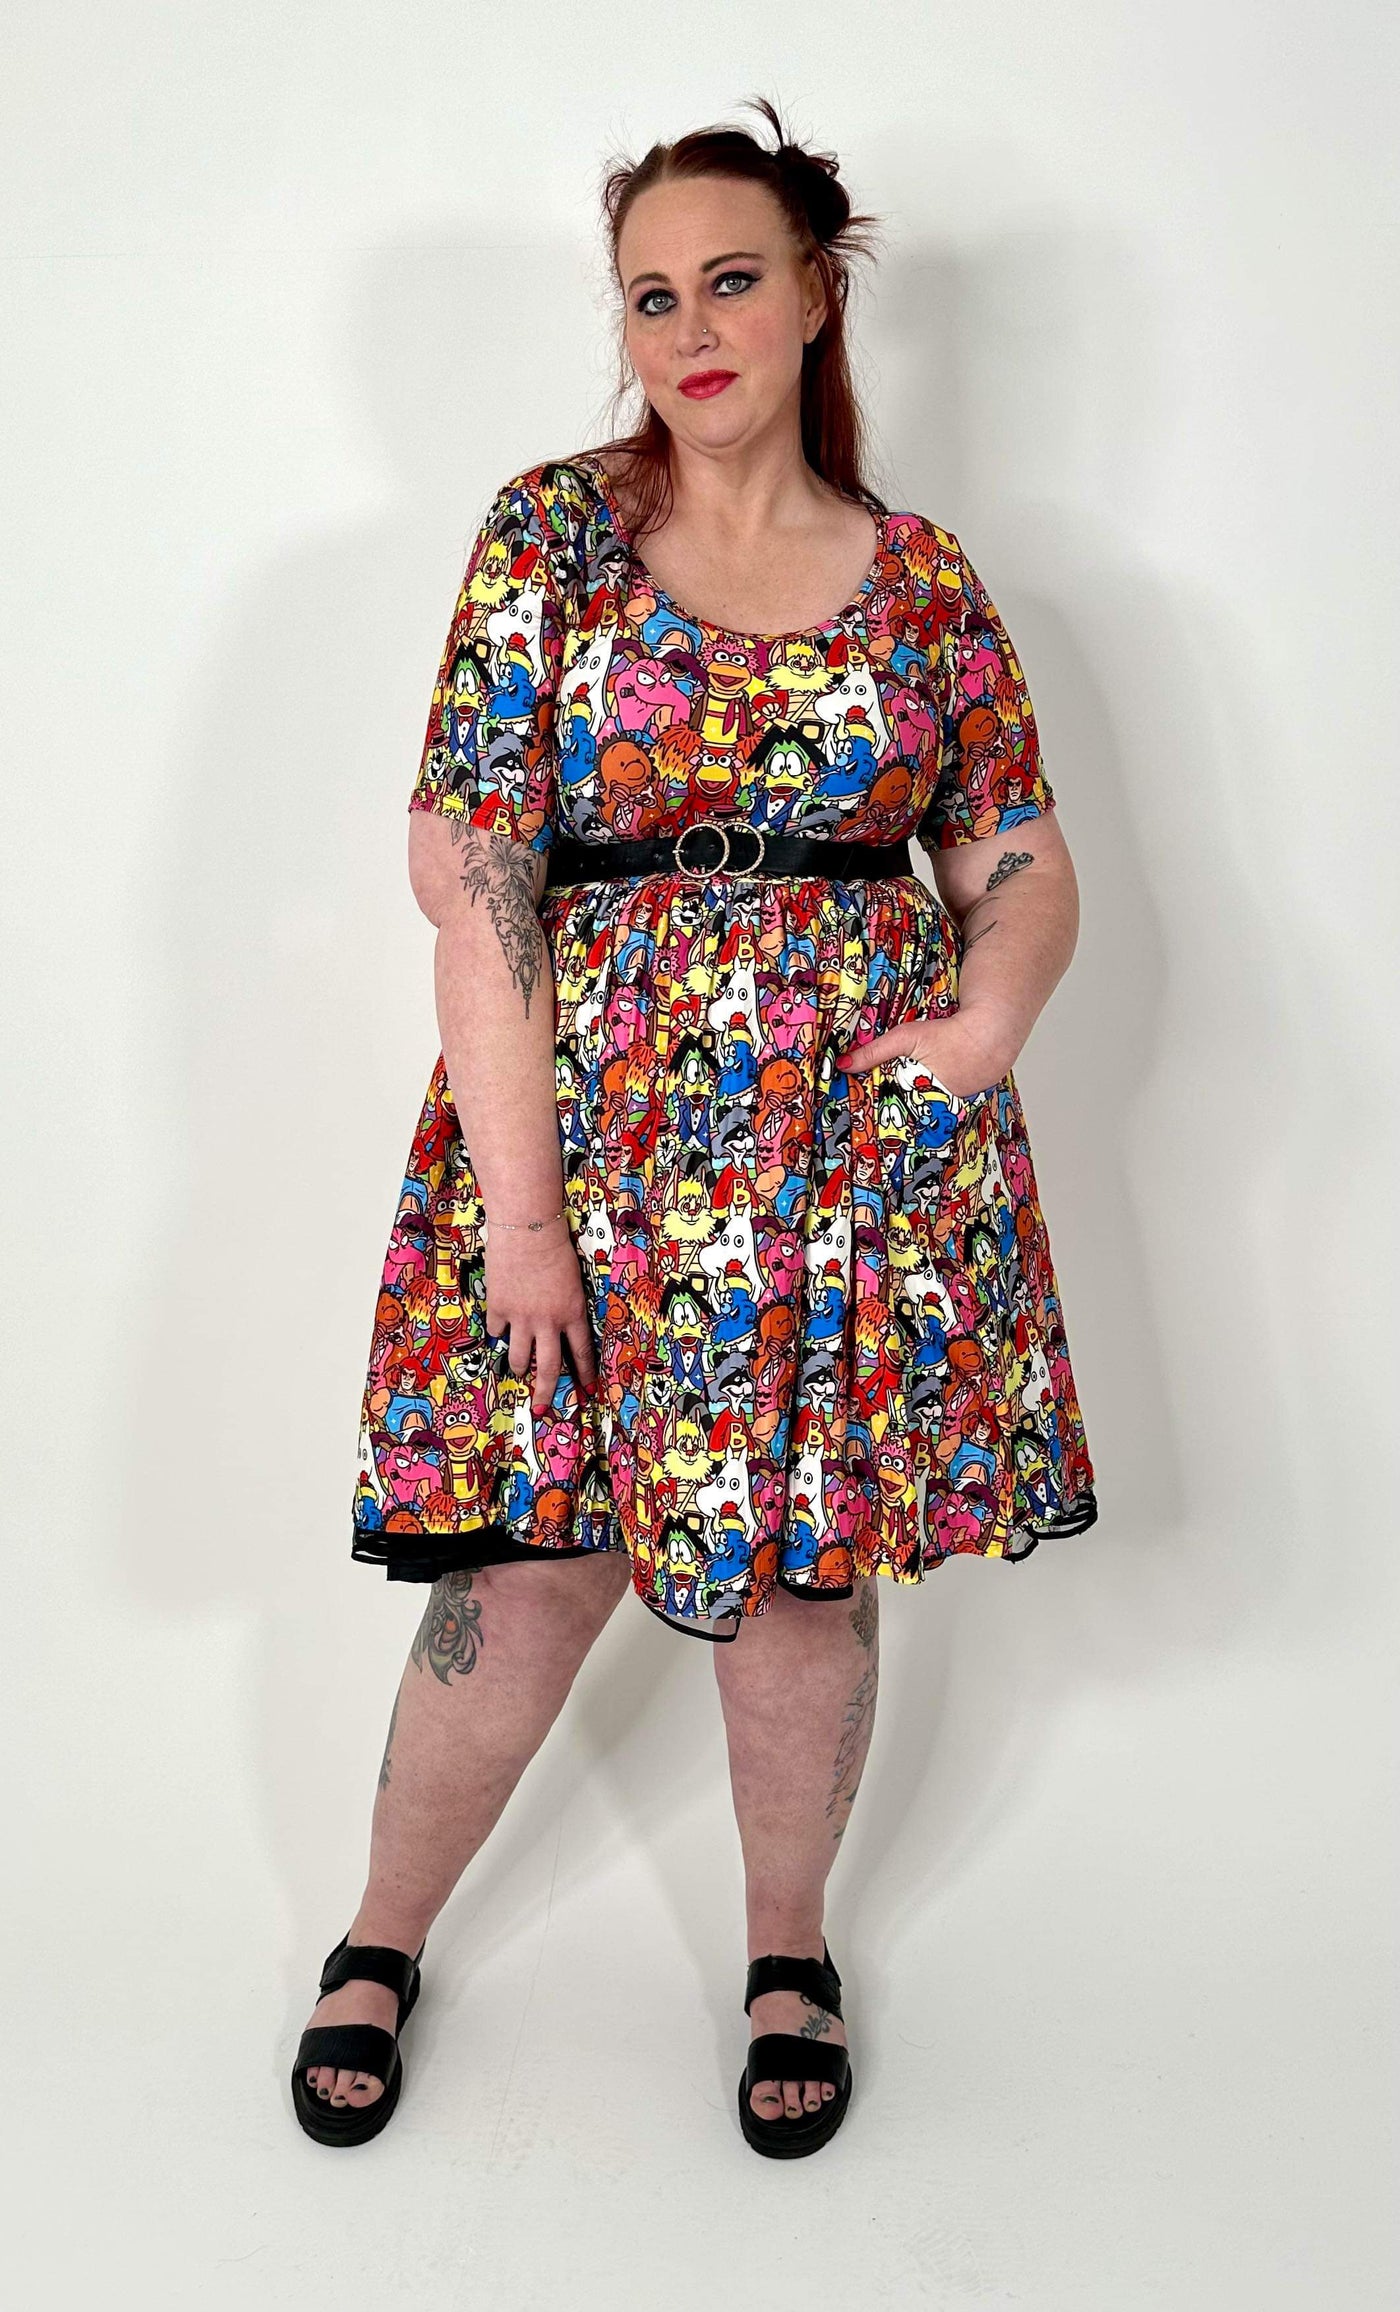 Tune In To The 80's 2-Way Pocket Skater Dress